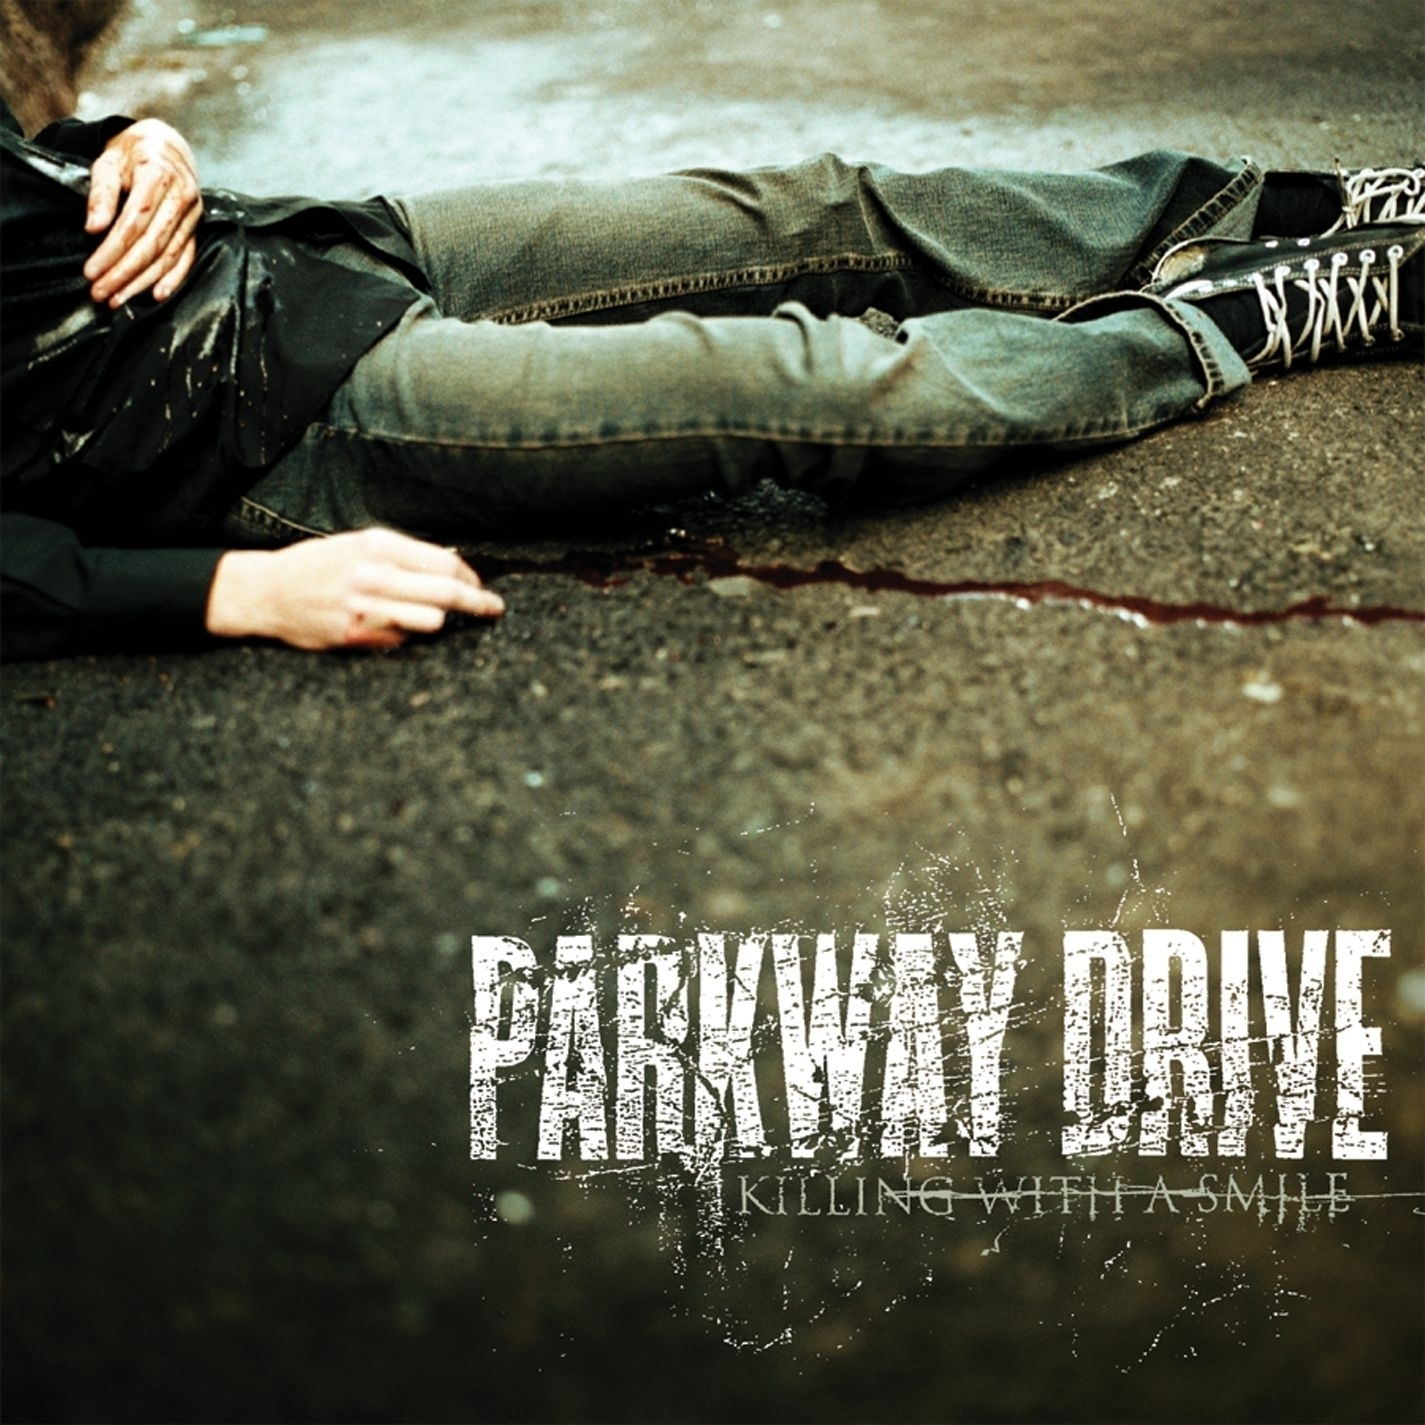 Parkway Drive - Killing with a Smile (2005)